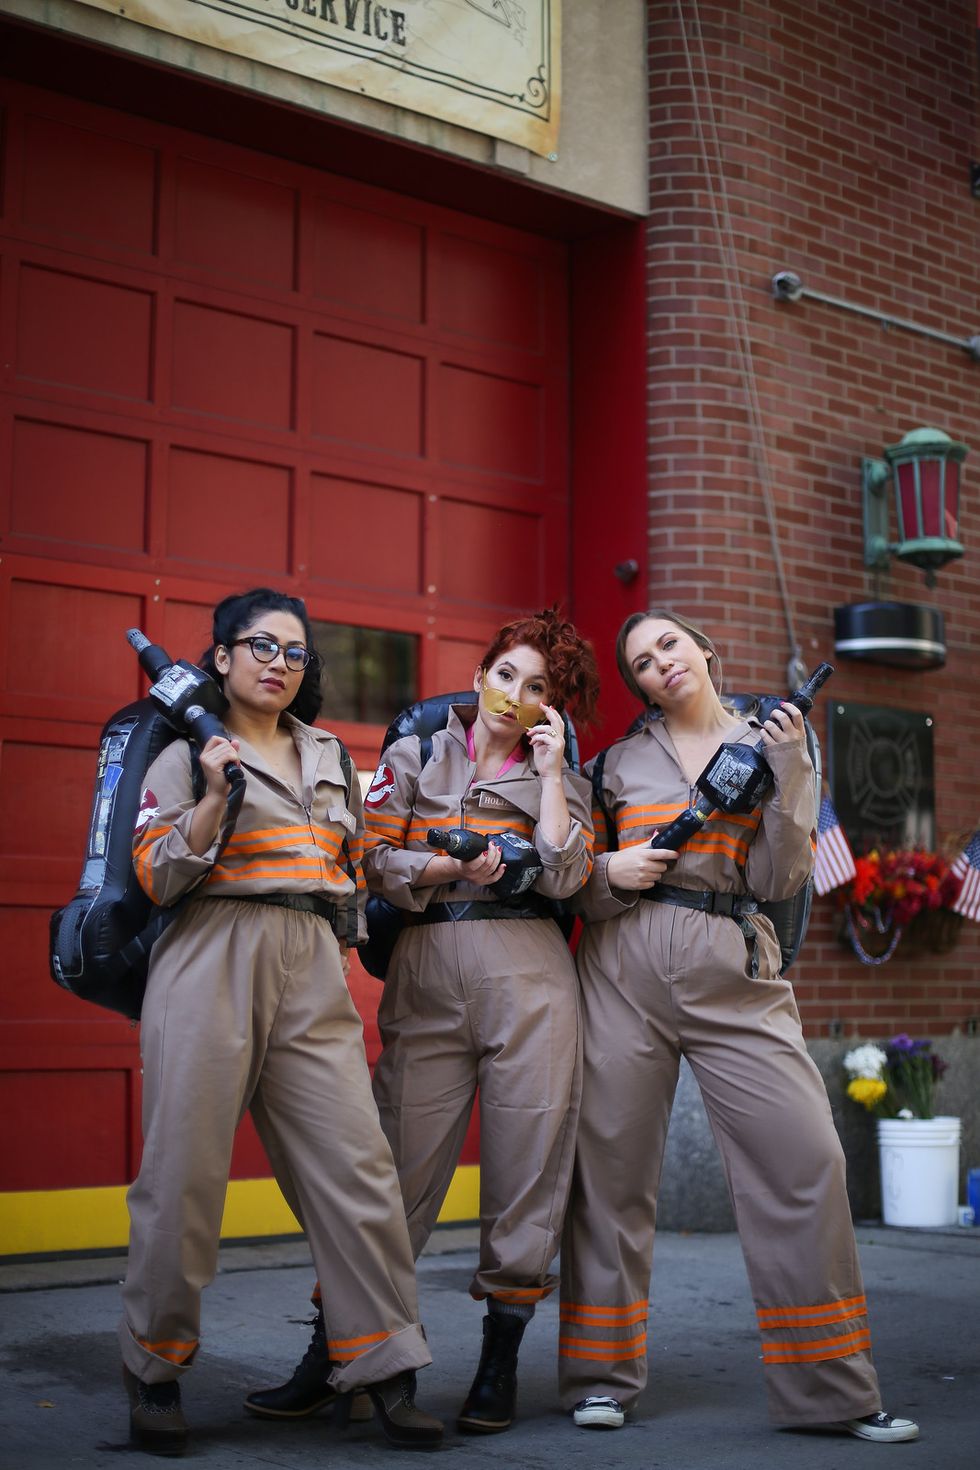 ghostbusters costumes